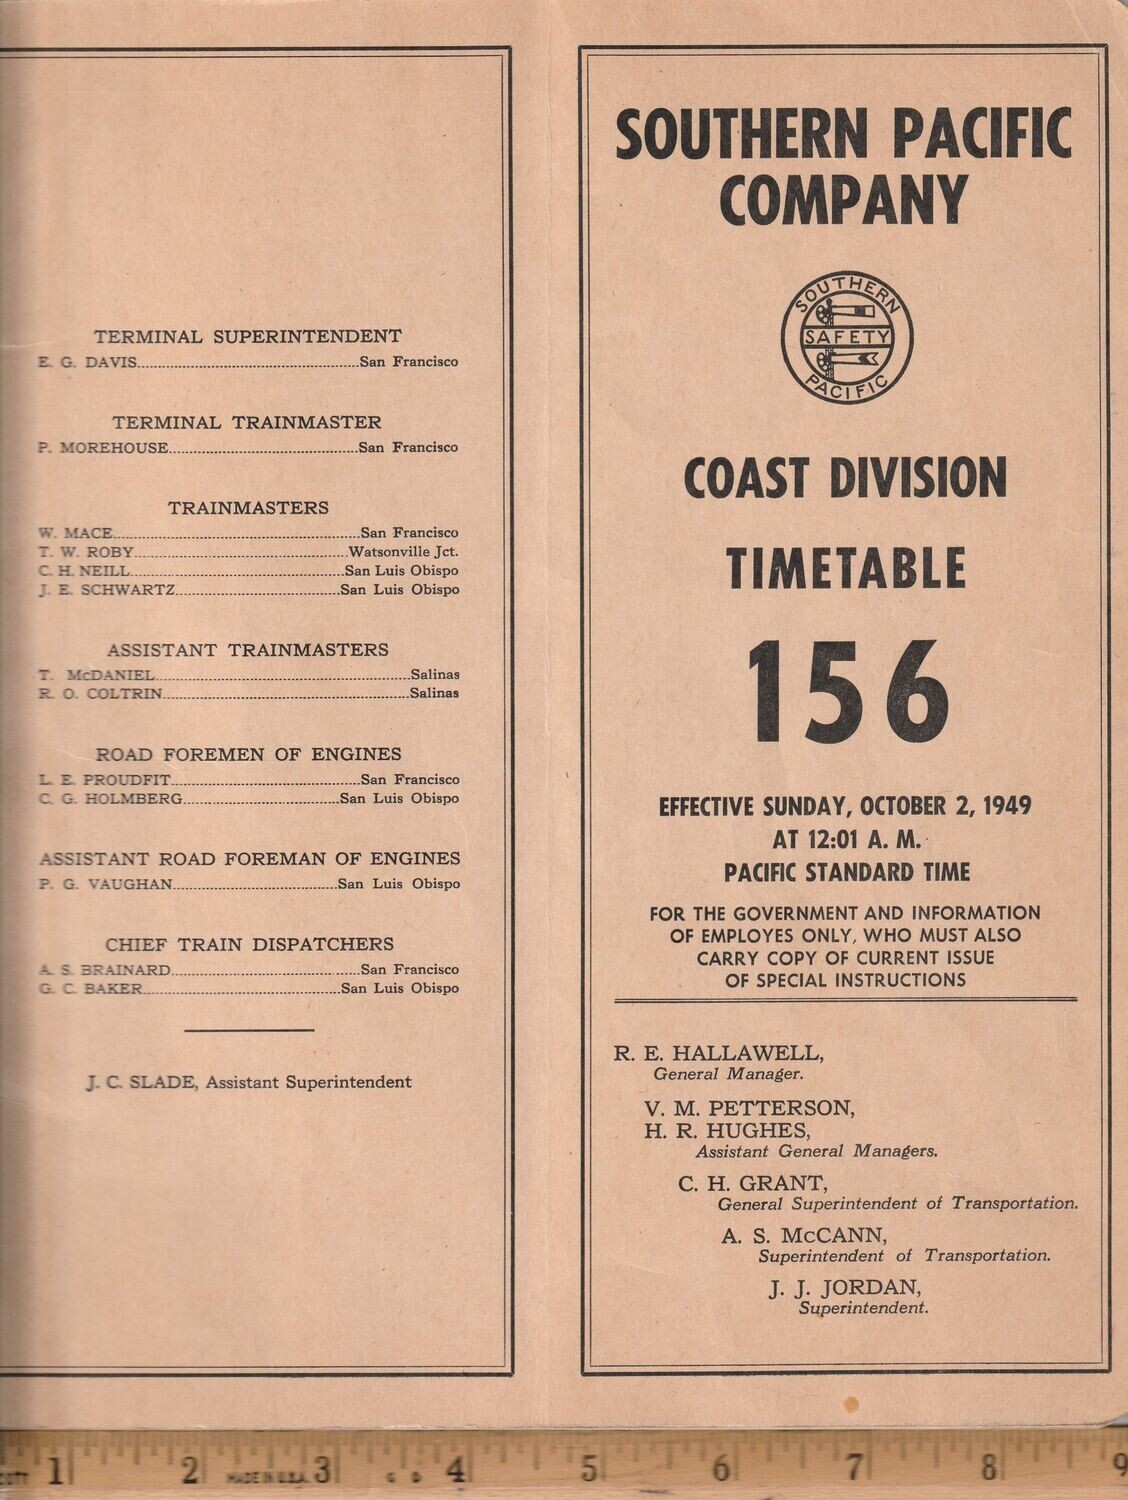 Southern Pacific Coast Division 1949